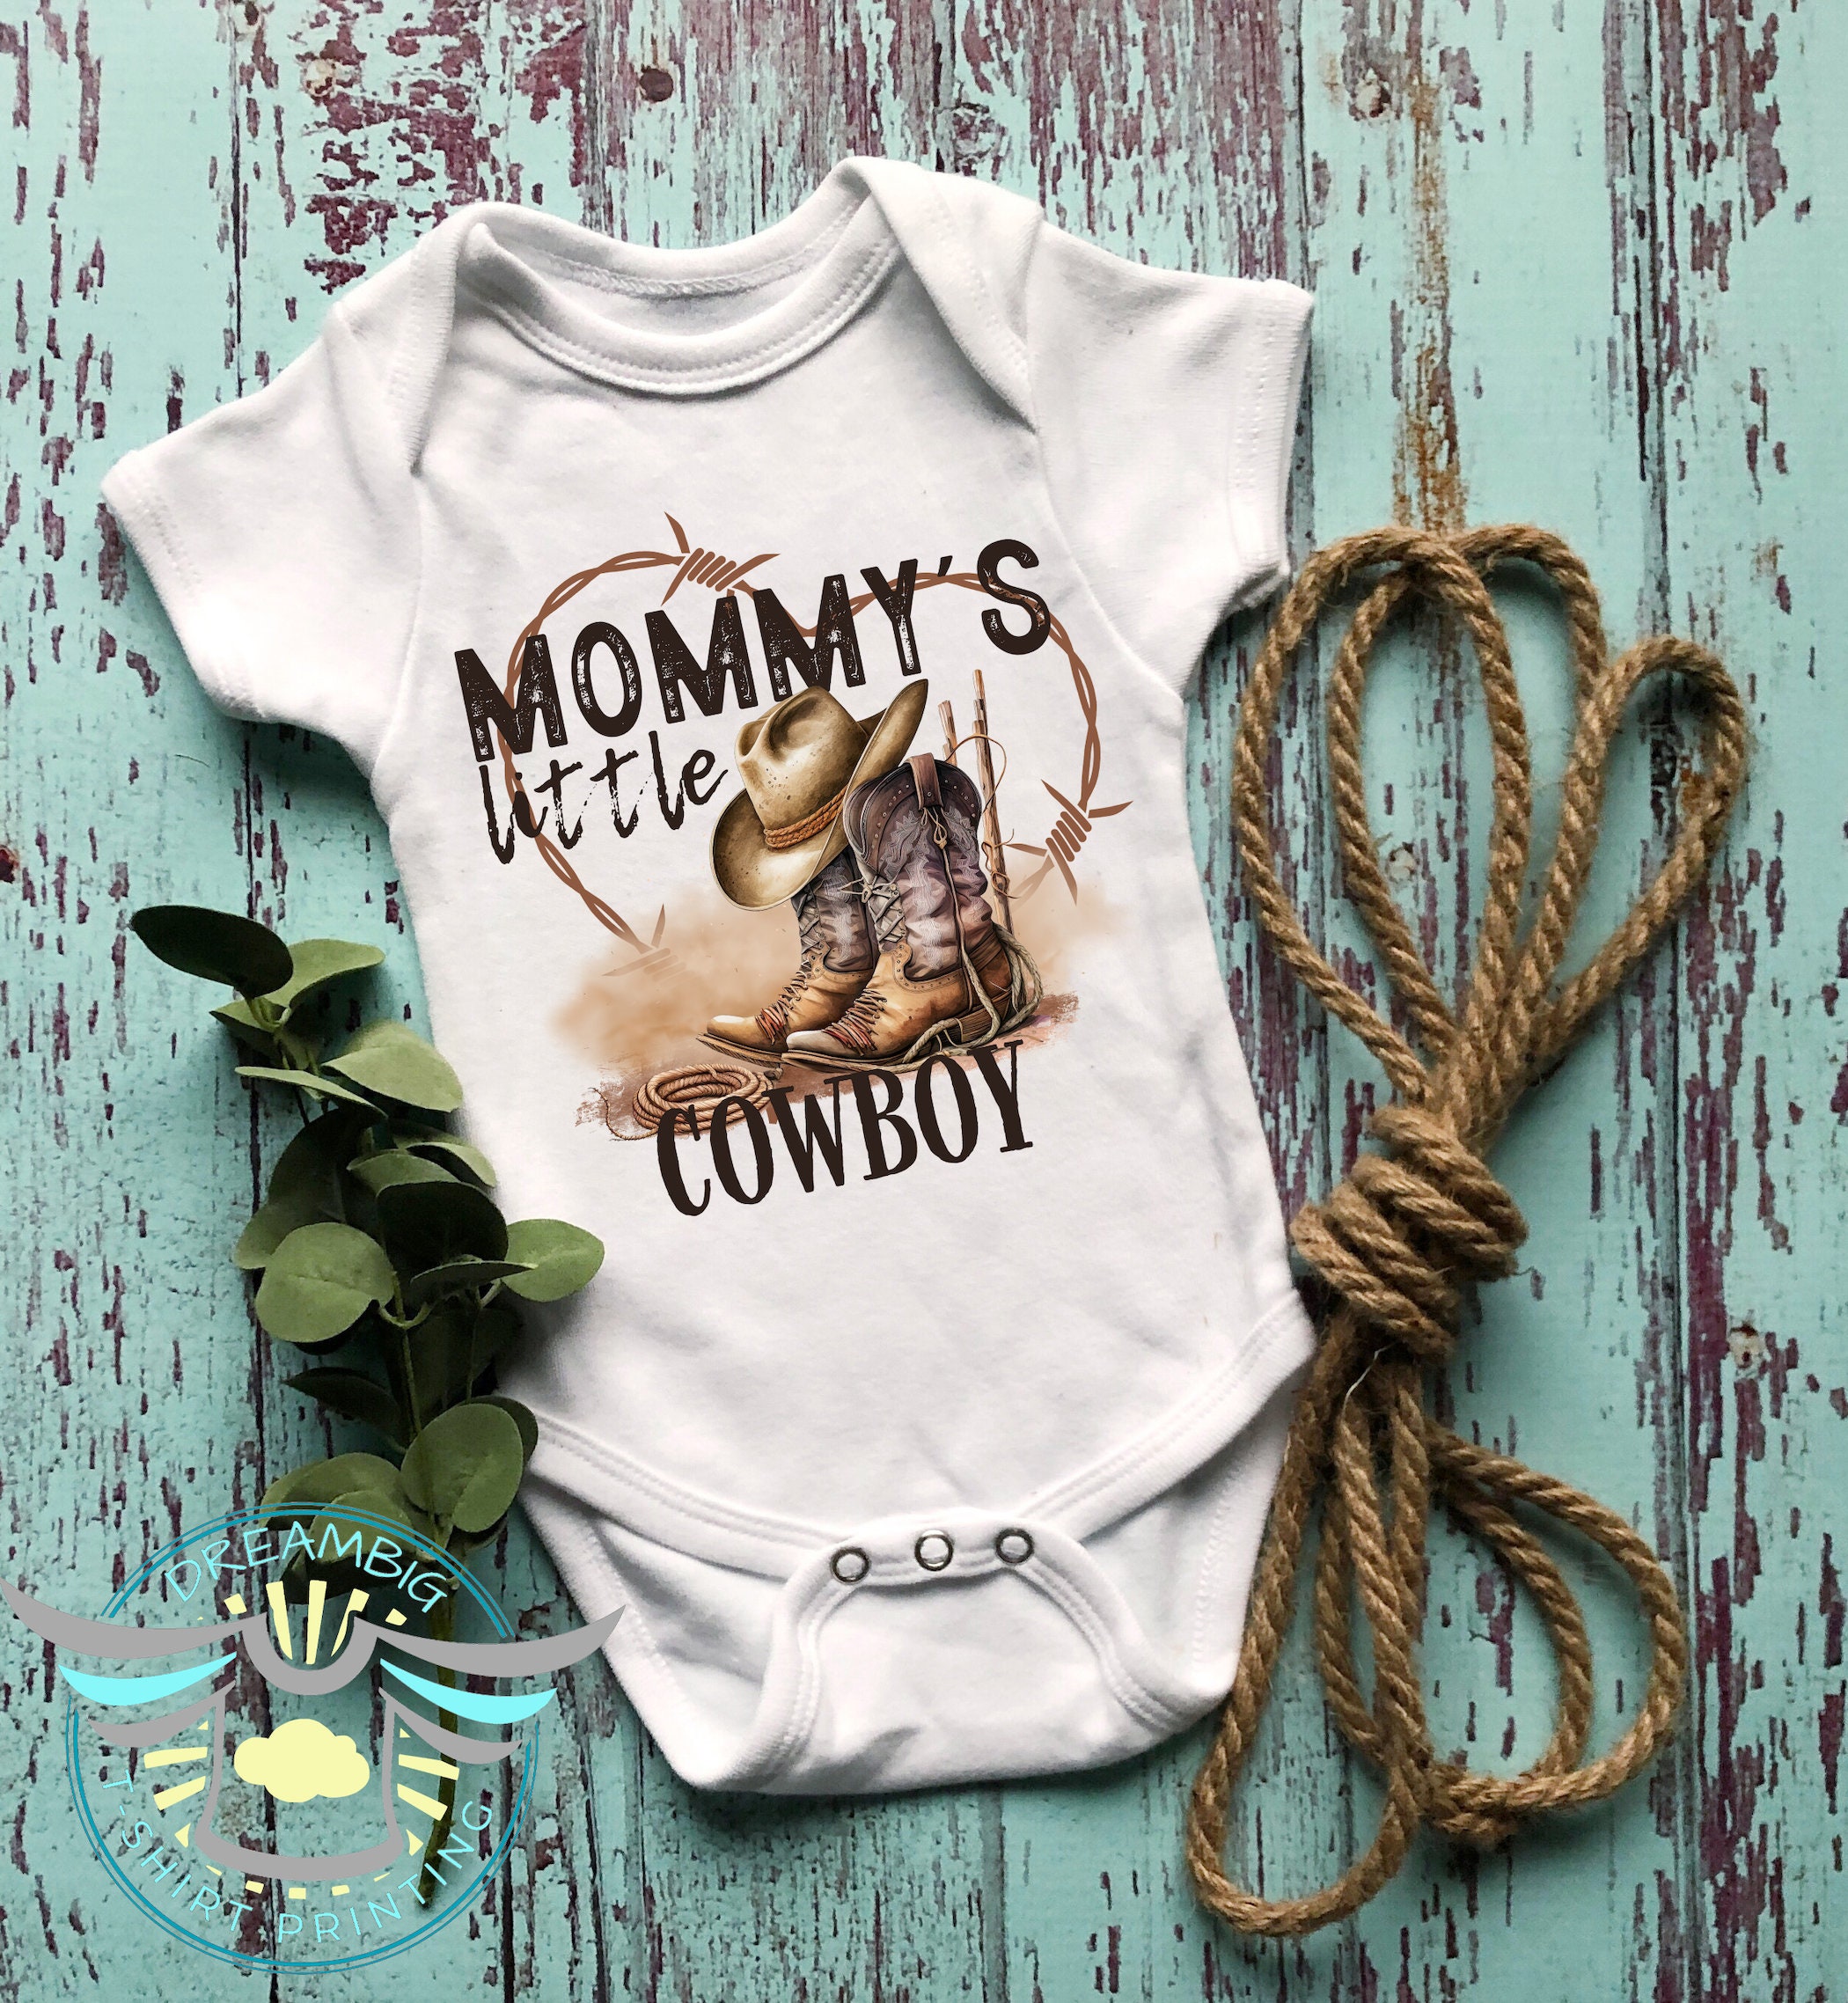 Small Town Girl Country Southern Cowgirl Girls Baby Infant Romper Newborn